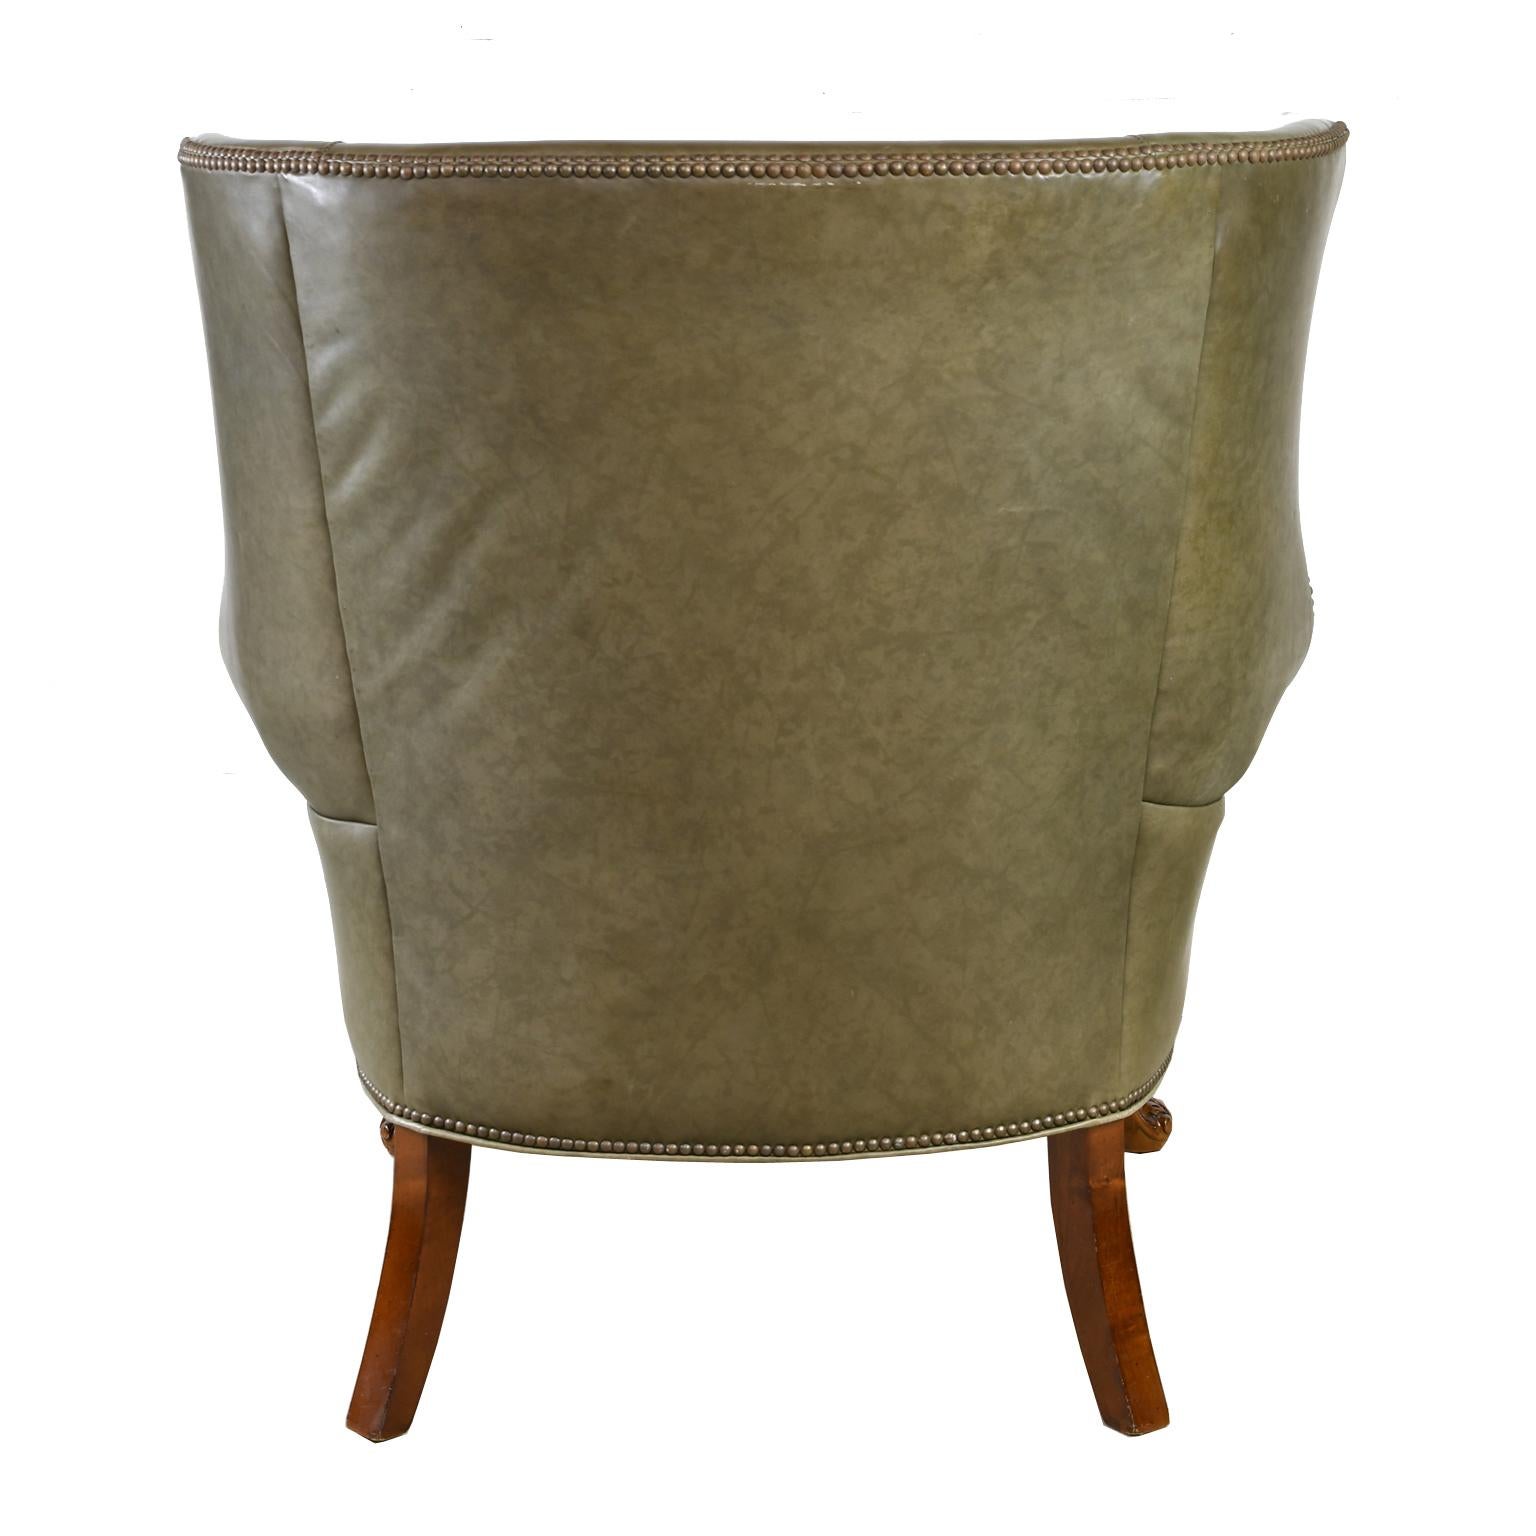 Georgian Large Vintage Wingback Armchair with Sage-Green Leather Upholstery